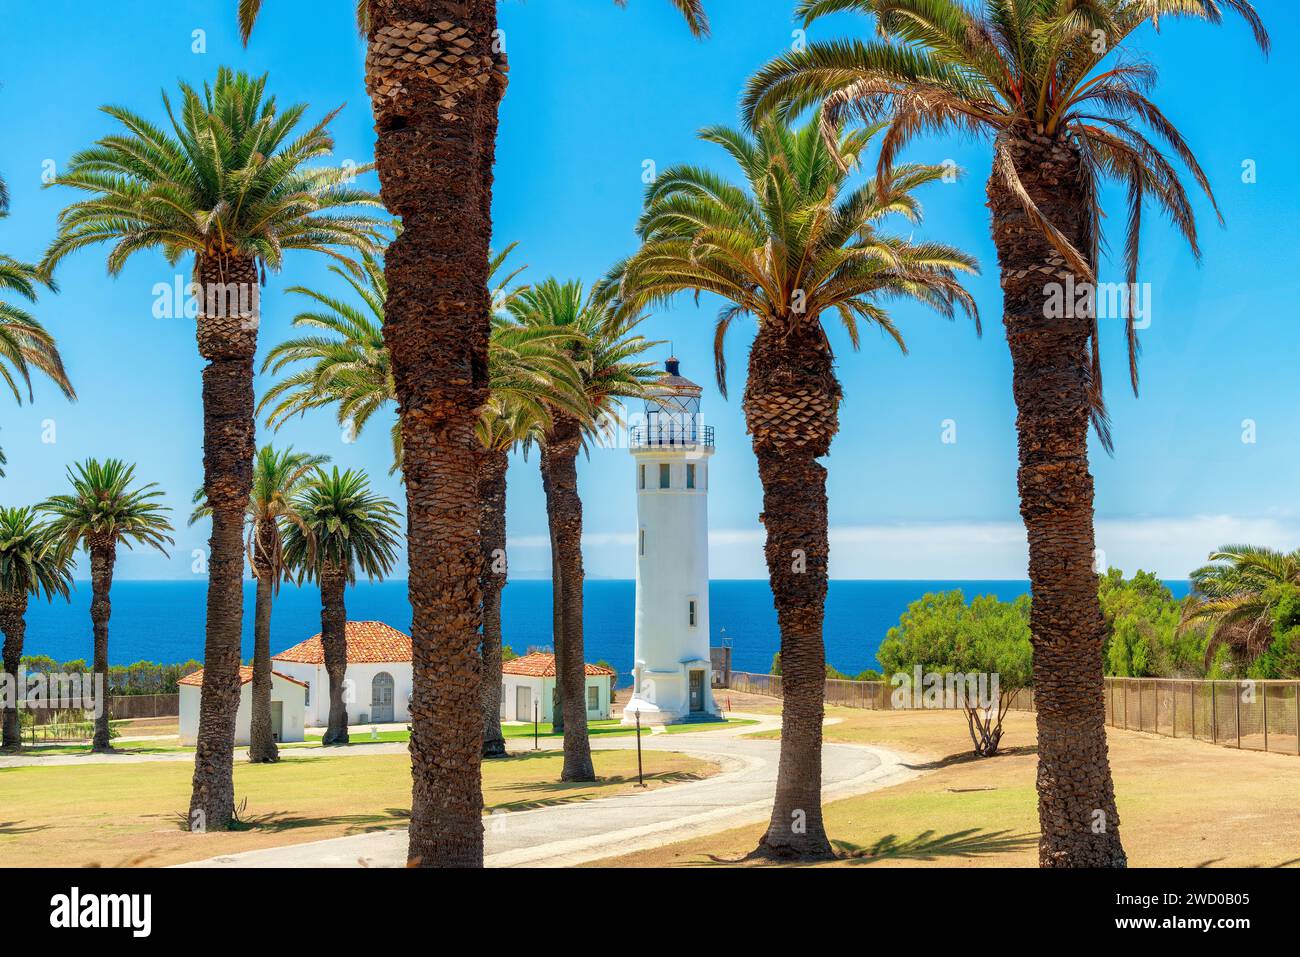 Palm trees around the Point Vicente Lighthouse in Ranchos Palos Verdes, California, USA Stock Photo